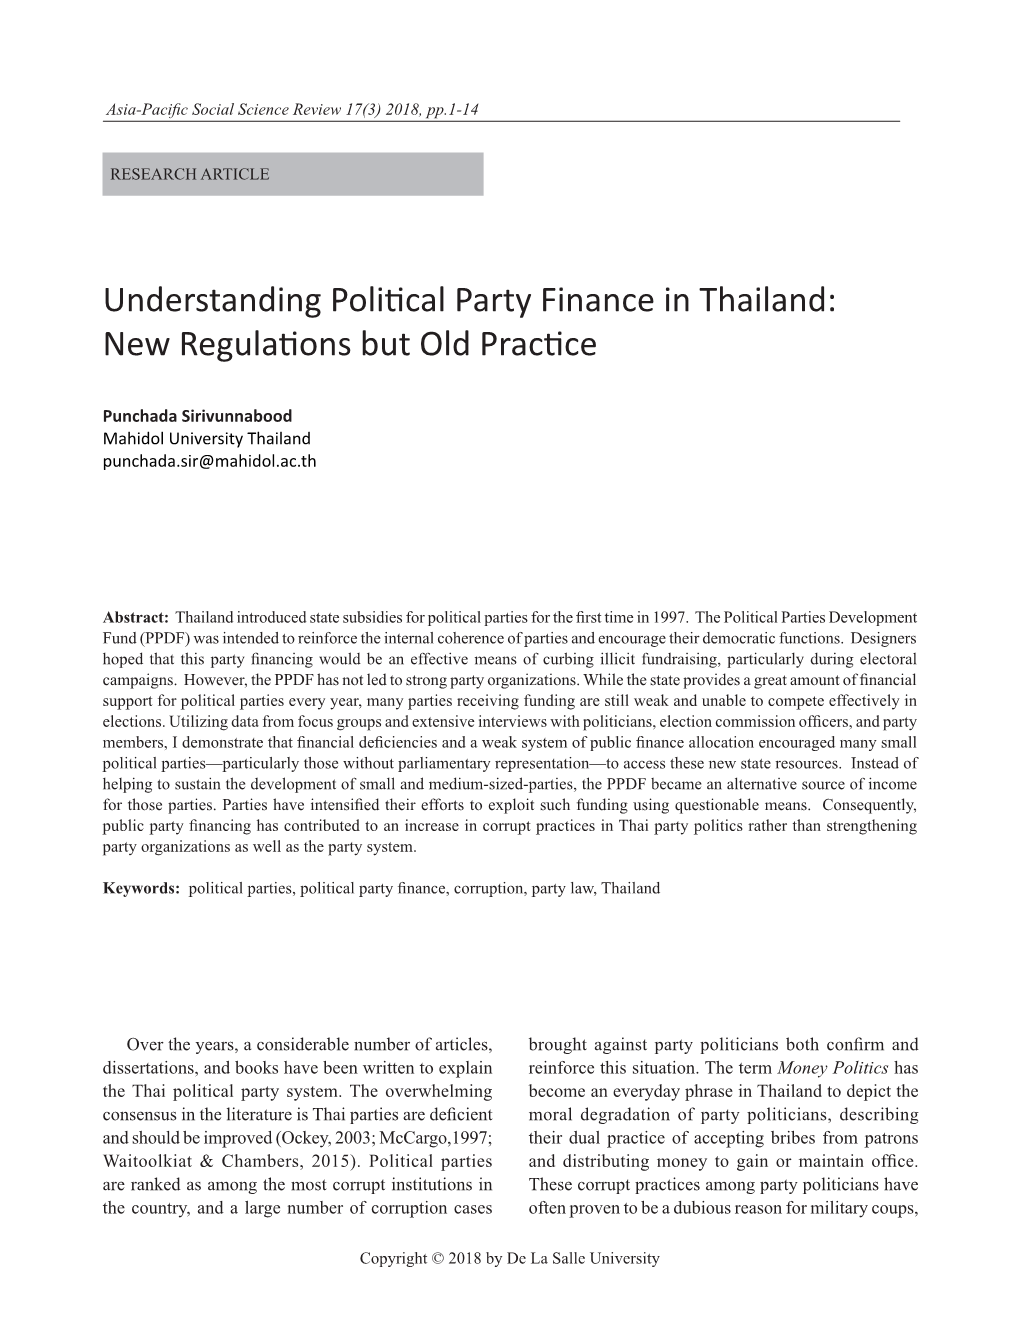 Understanding Political Party Finance in Thailand: New Regulations but Old Practice